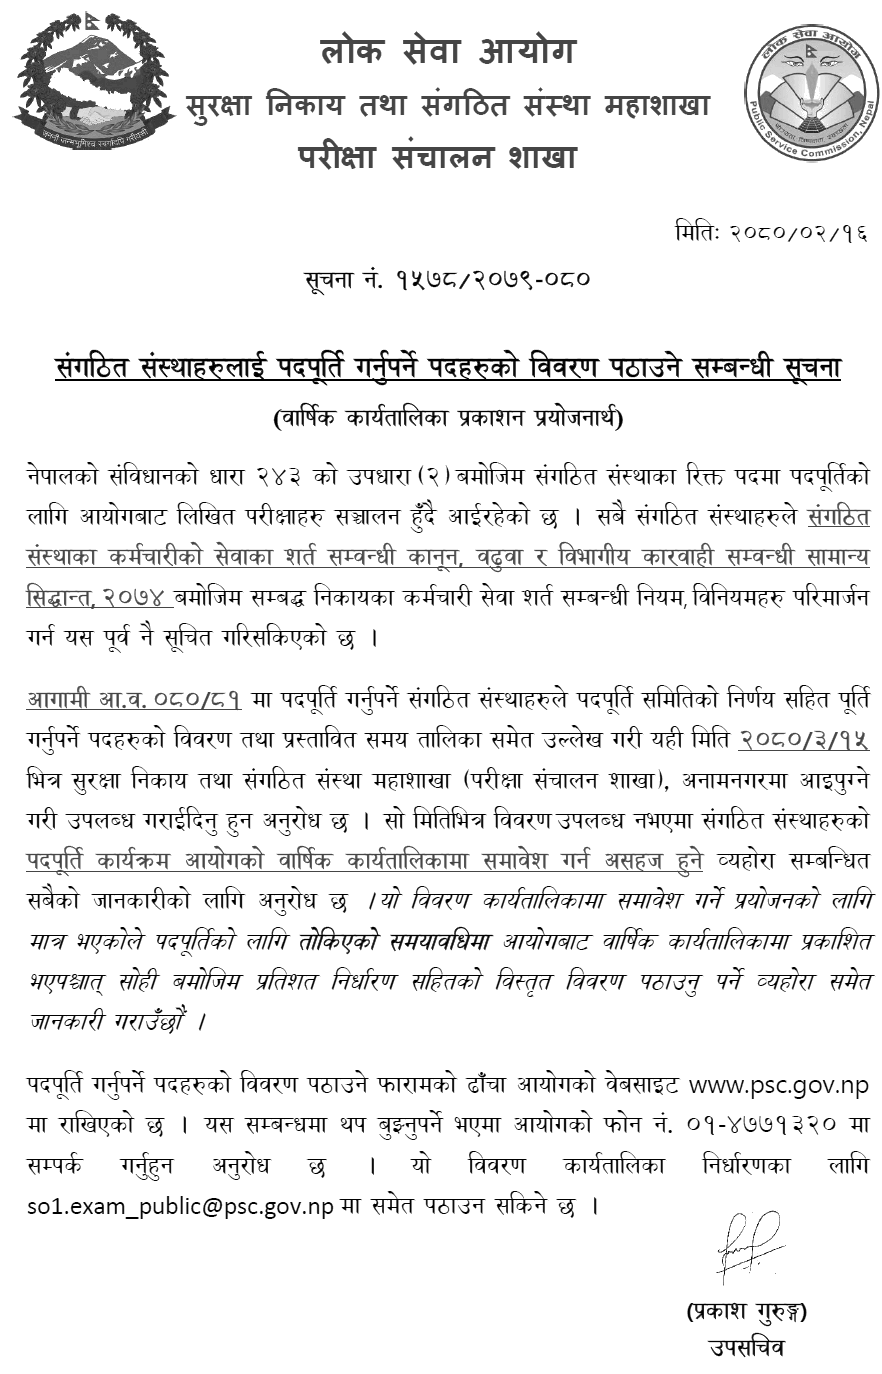 Lok Sewa Aayog Notice for Submitting Details of Vacant Posts for Organized Organizations